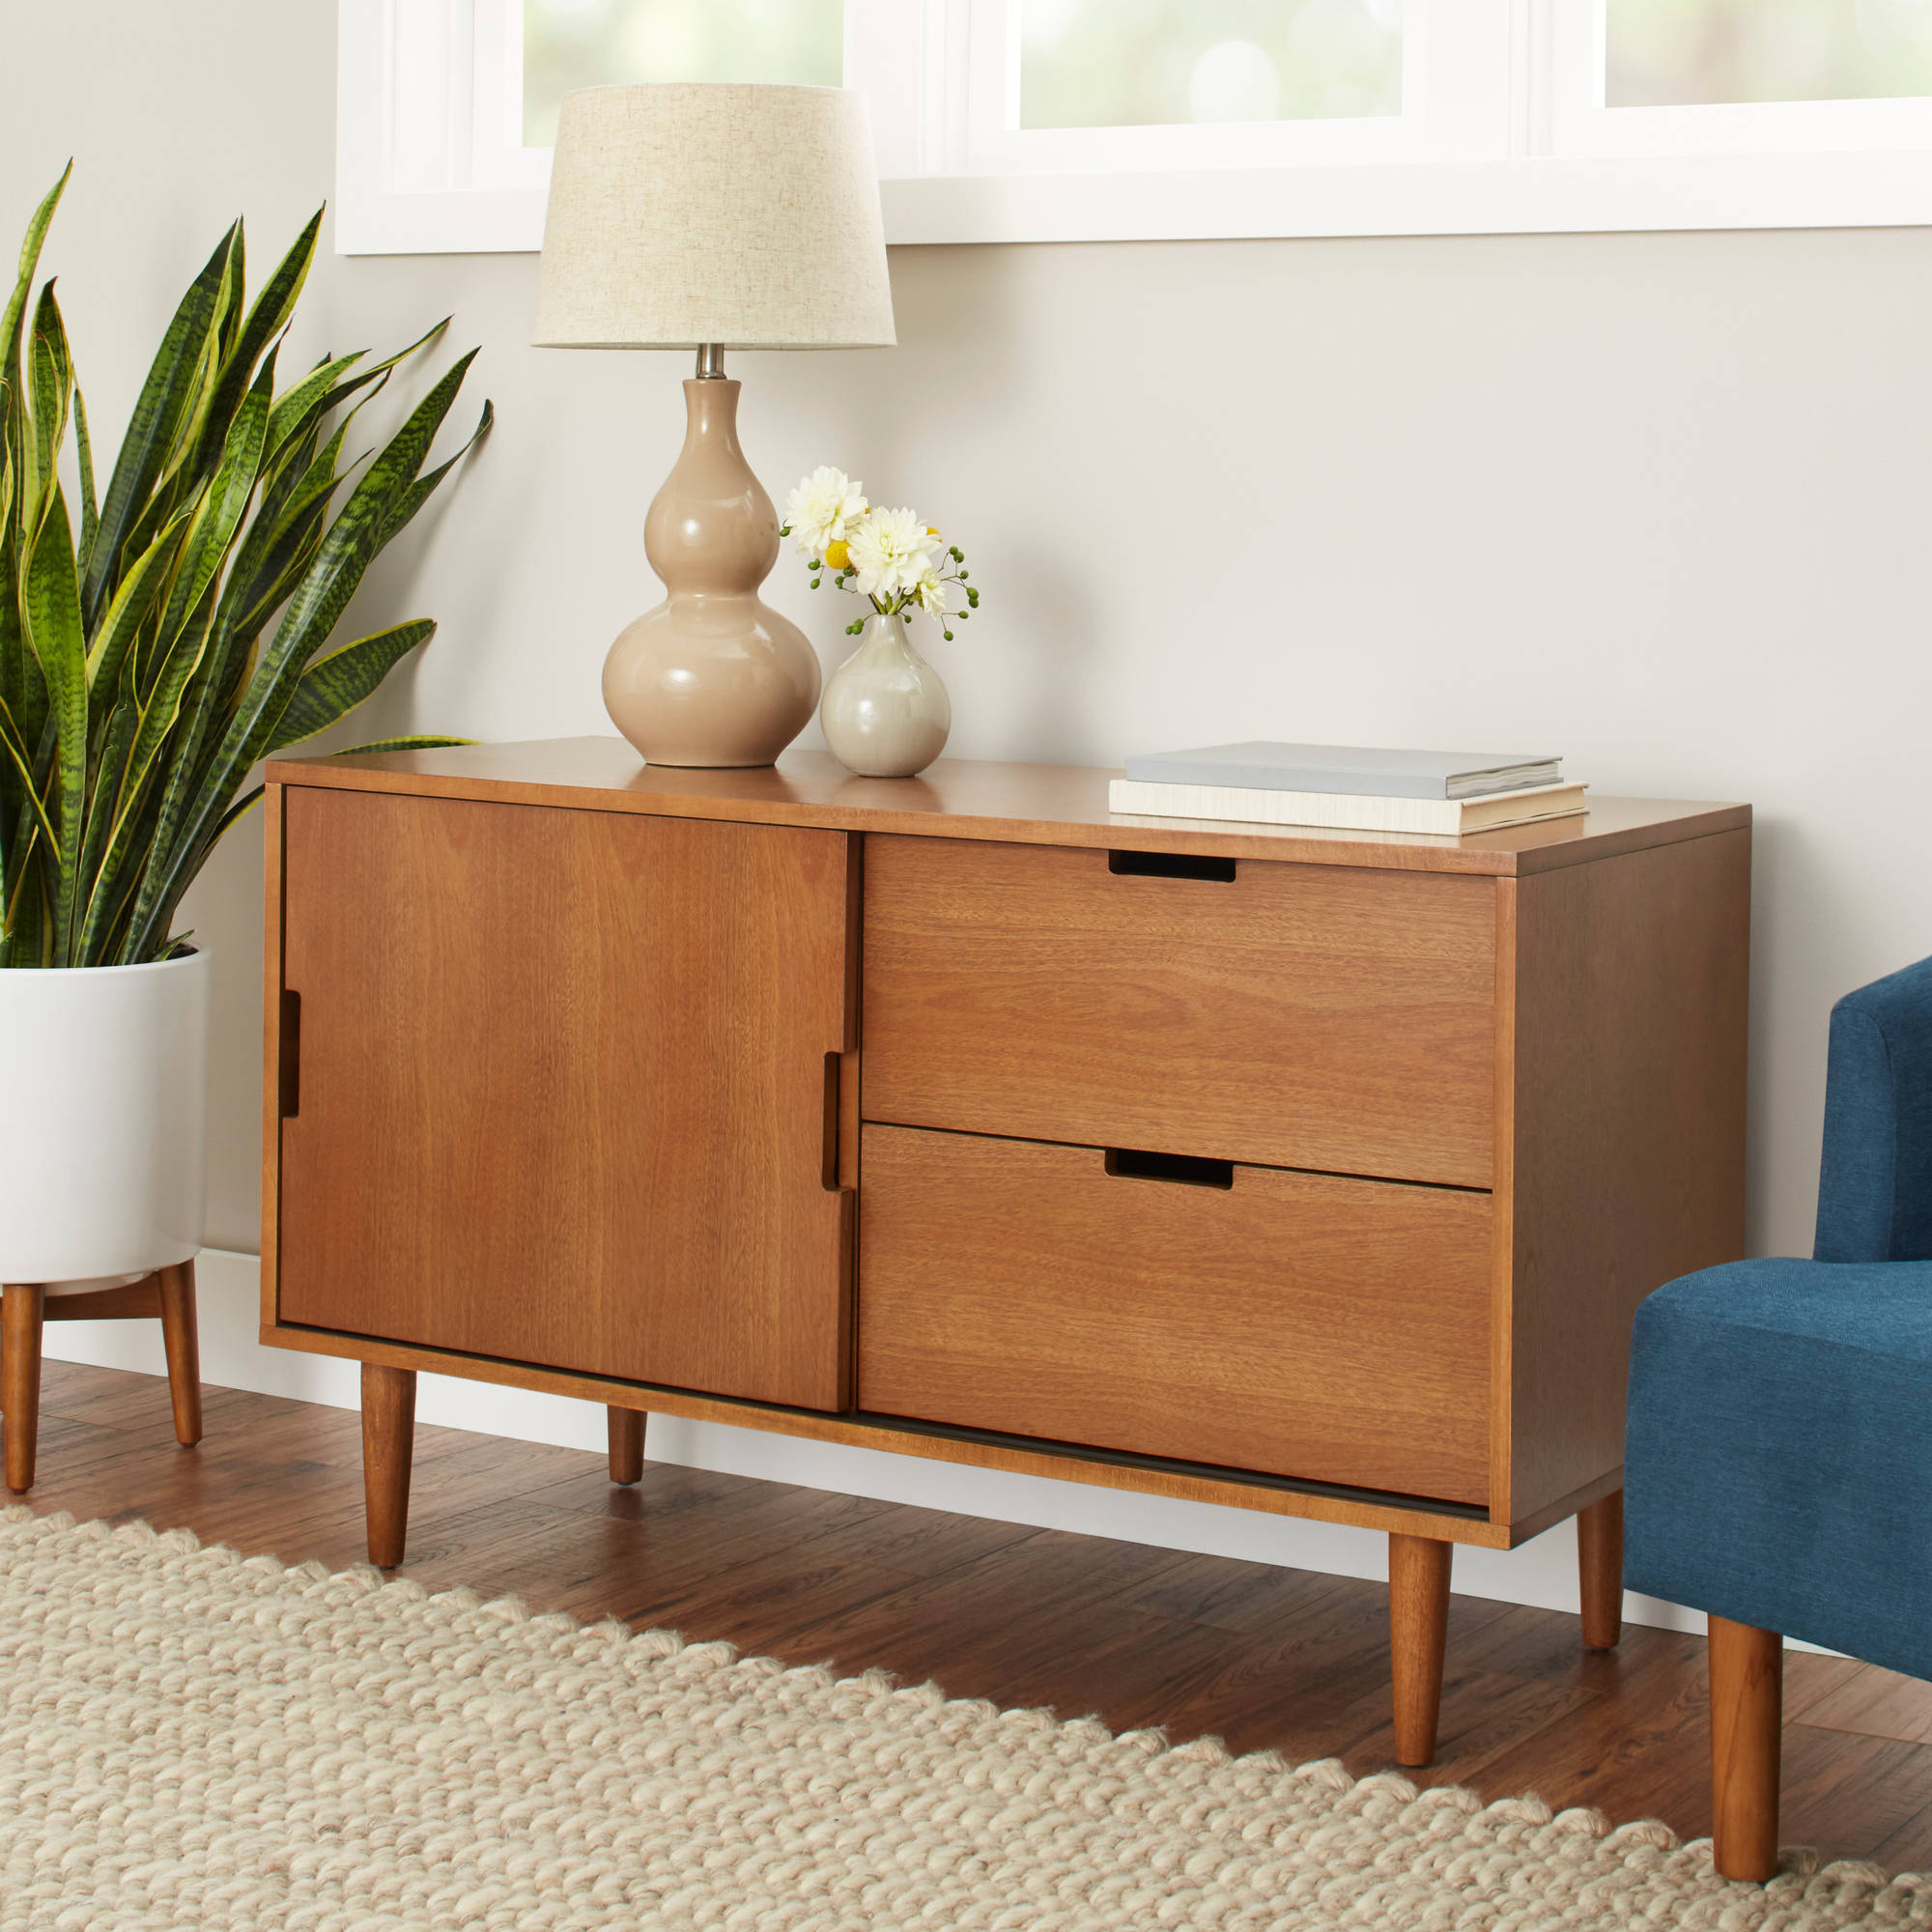 Better Homes and Gardens Flynn Mid Century Modern Credenza, Pecan - image 1 of 4